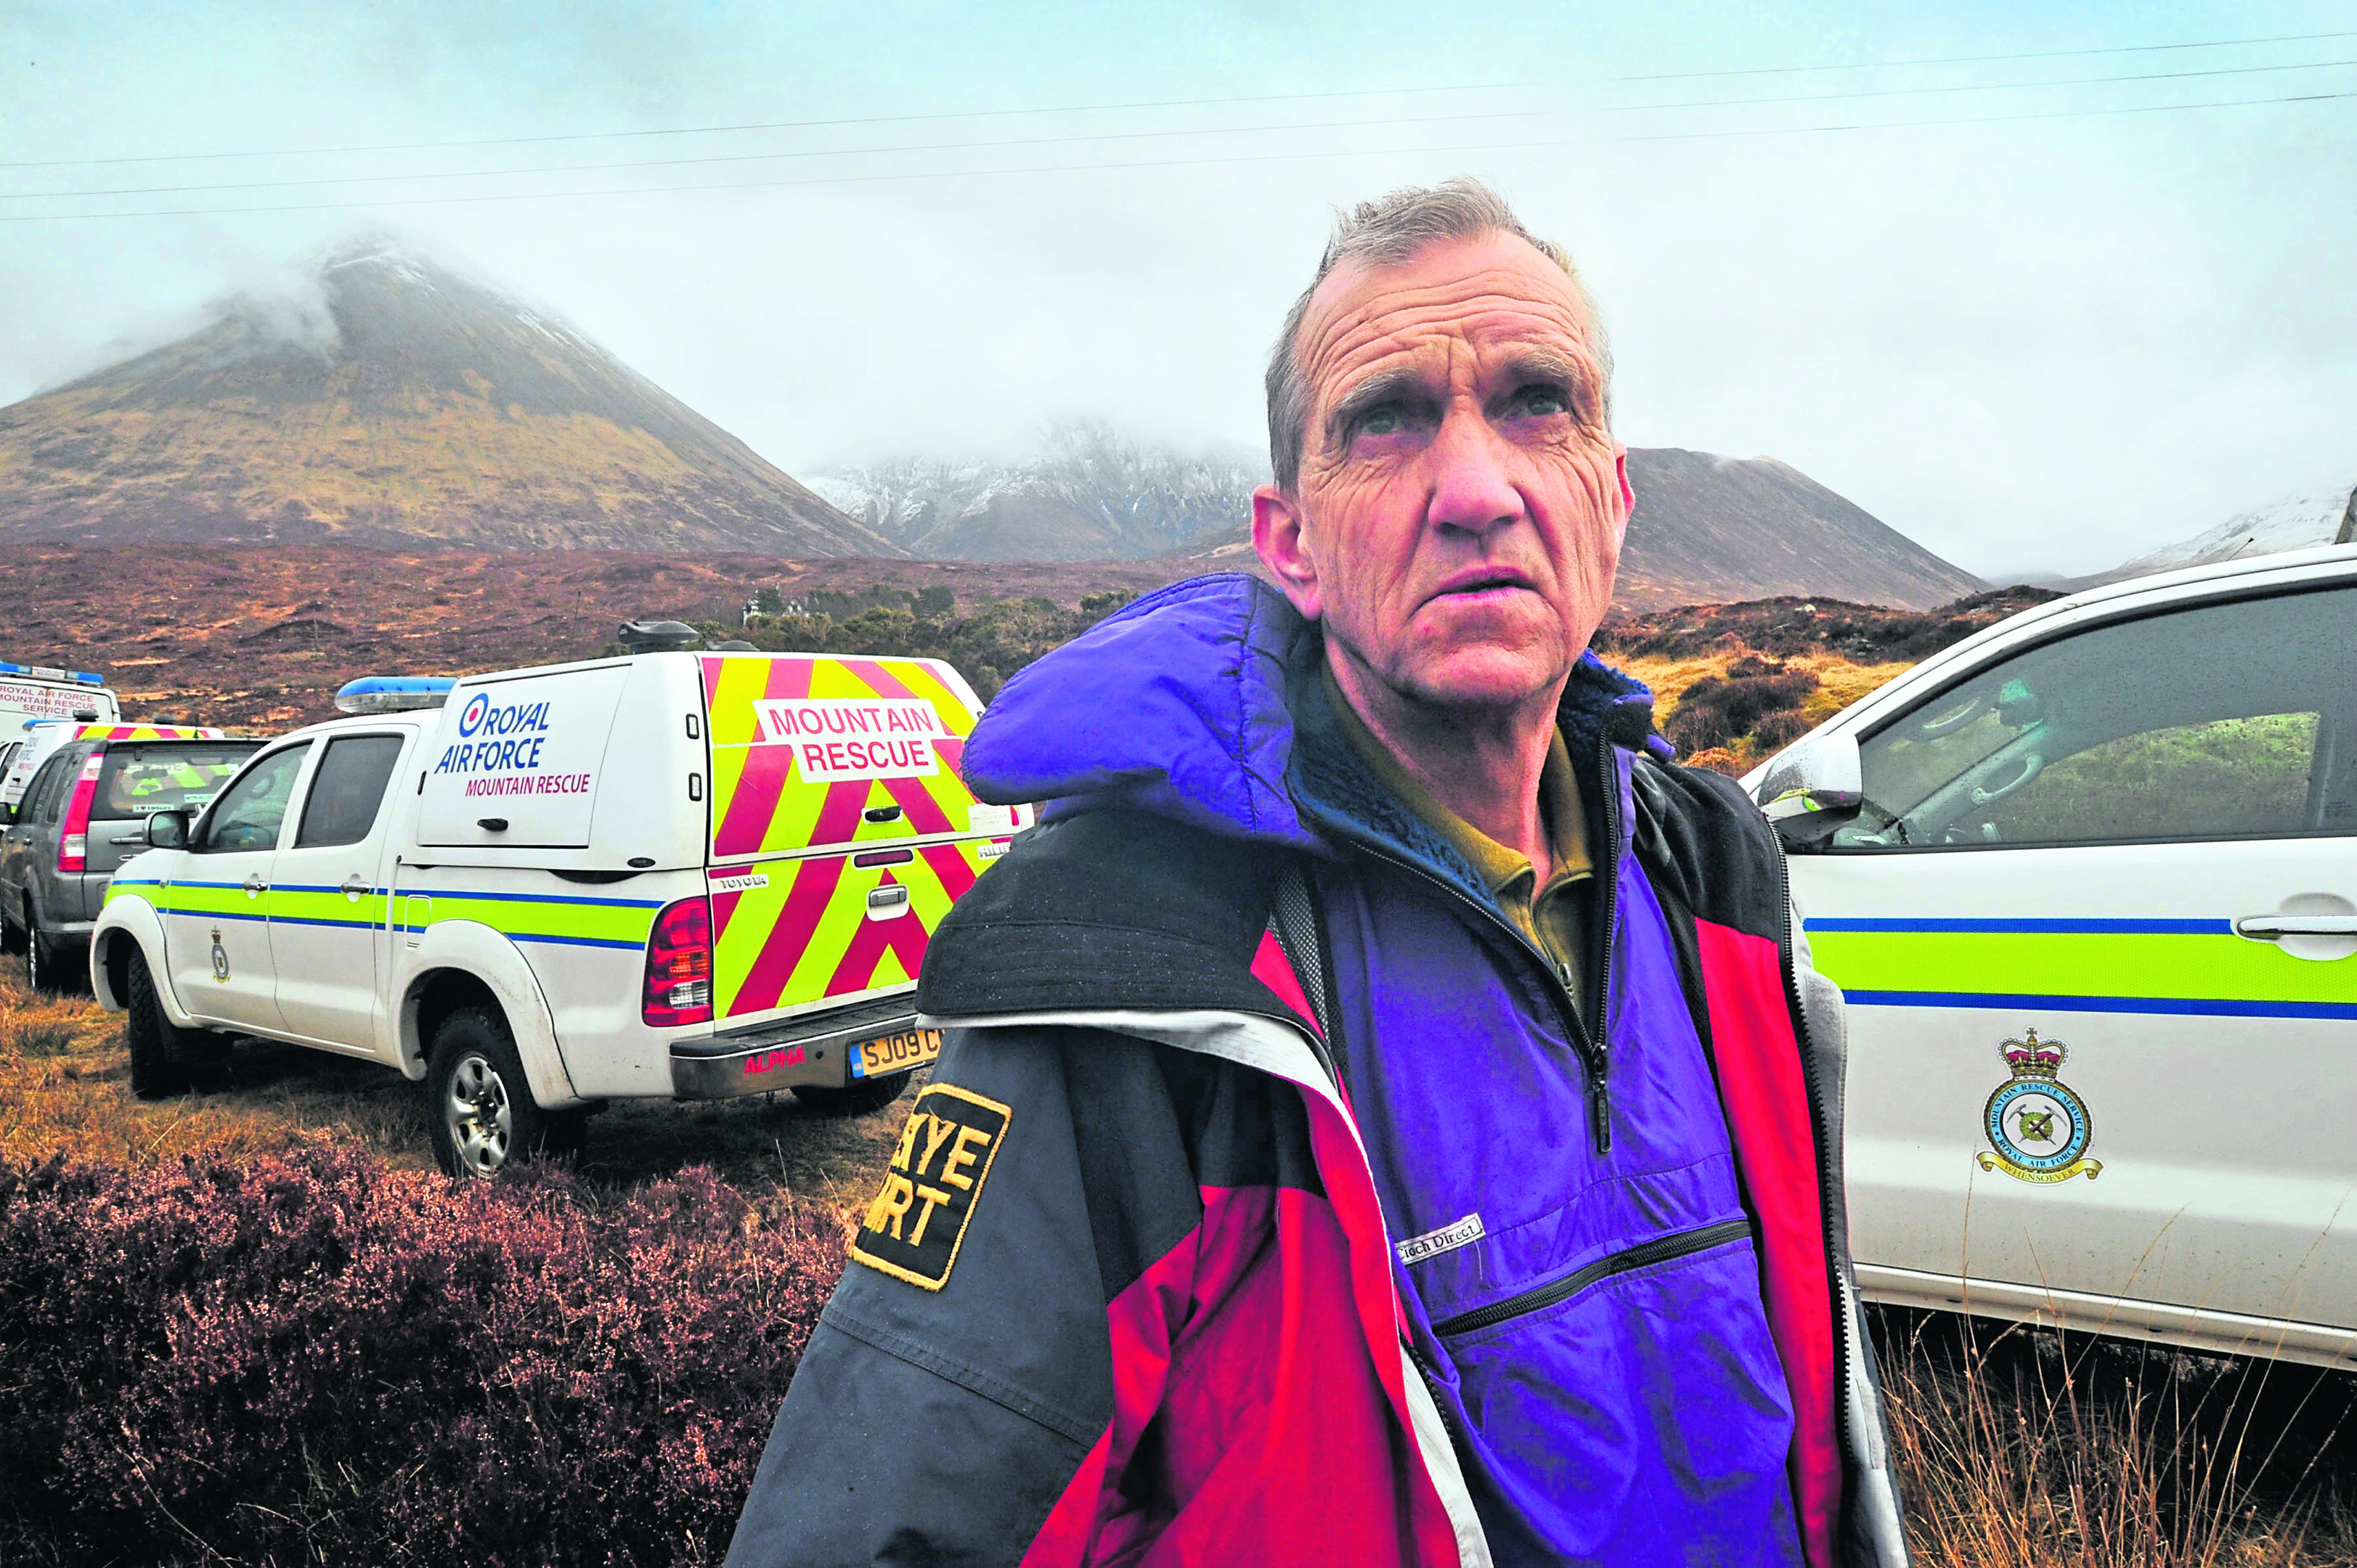 Gerry Akroyd first joined the Skye Mountain Rescue Team back in 1972 and will continue to serve but in a reduced capacity